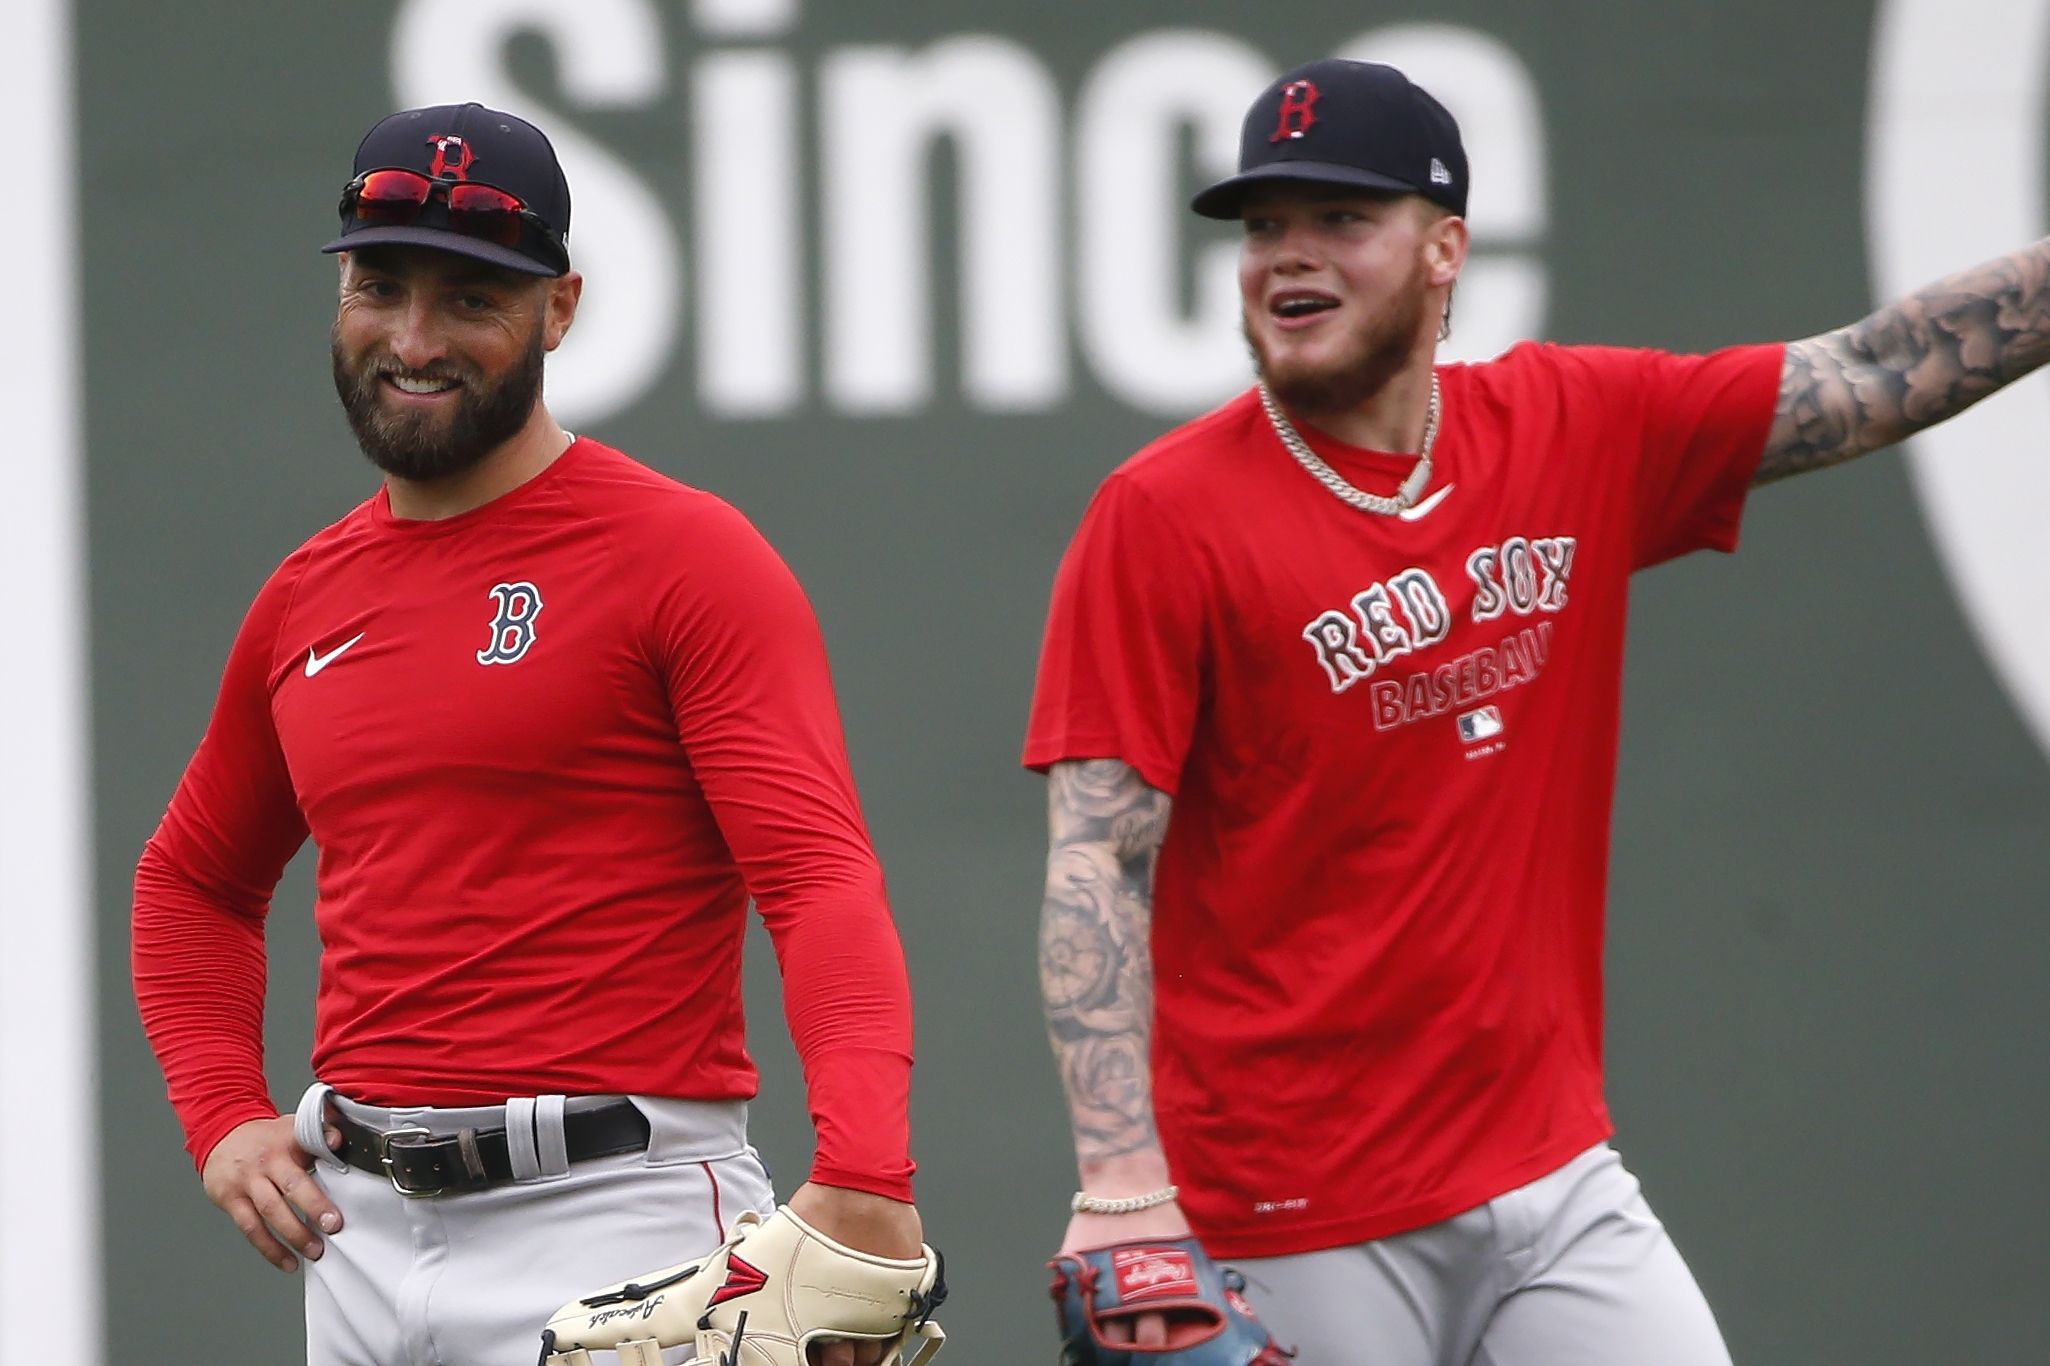 Kevin Pillar's message on the Red Sox' struggles this season: 'If